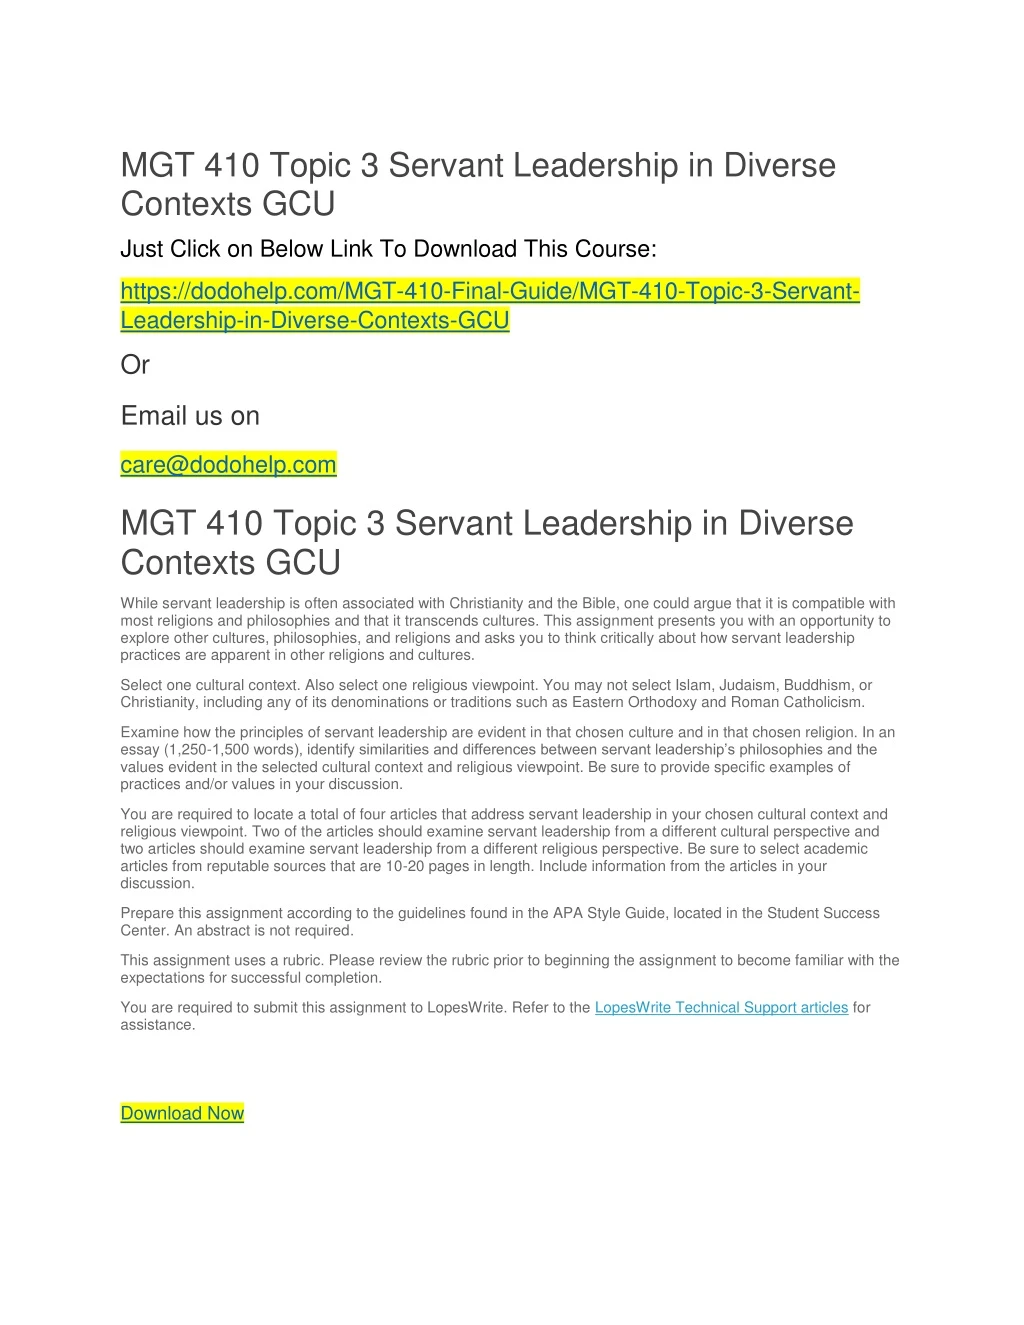 mgt 410 topic 3 servant leadership in diverse